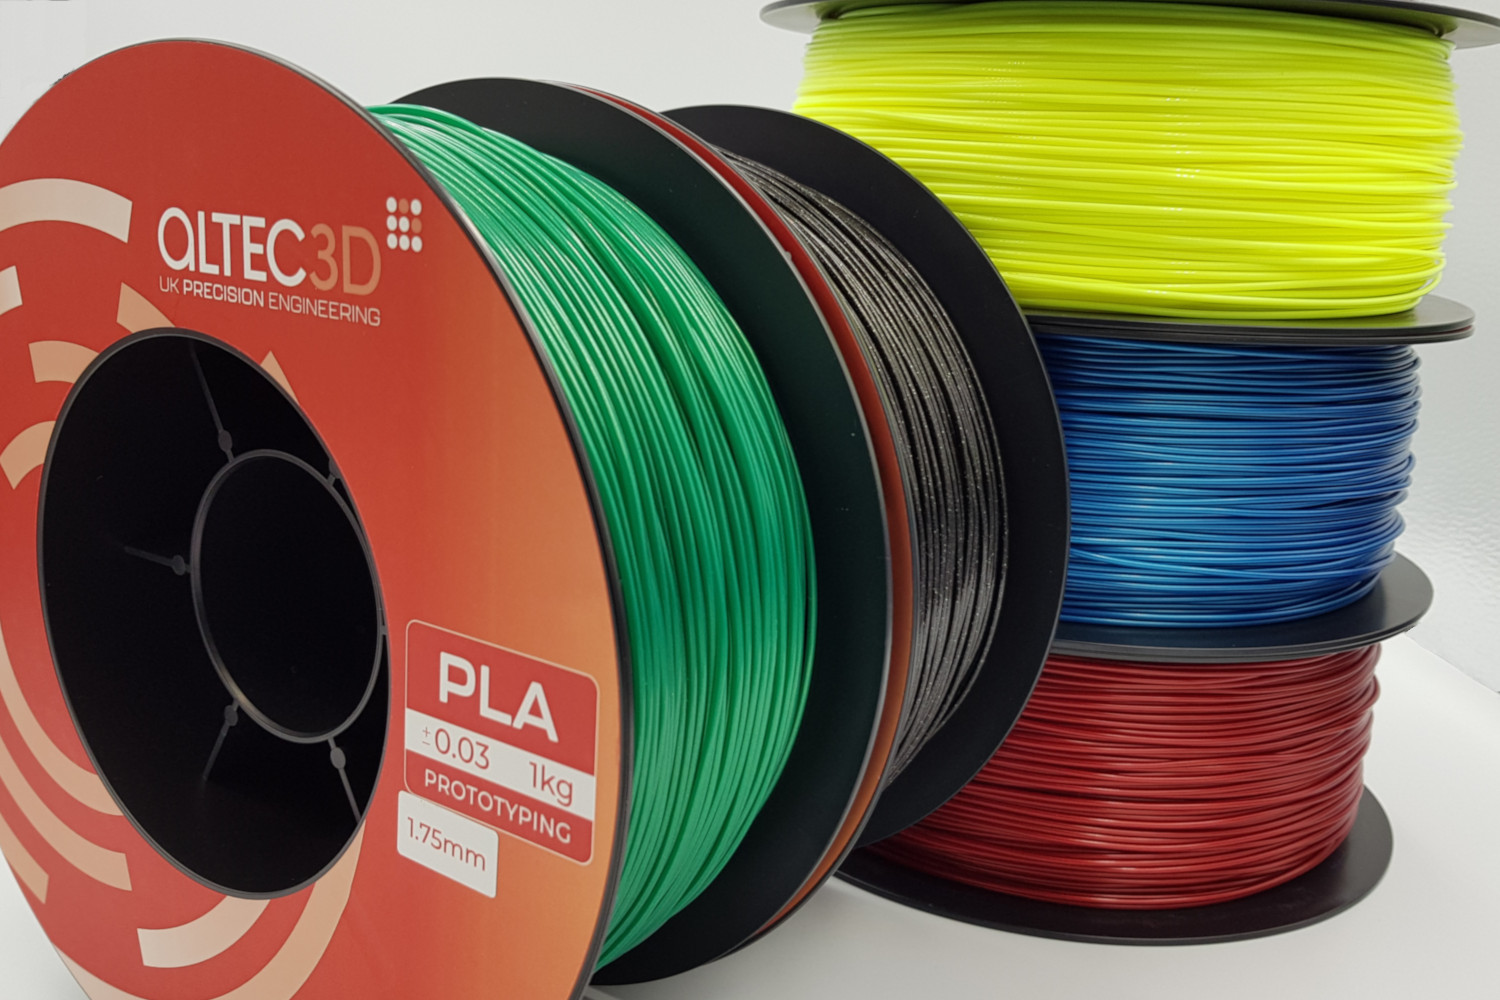 More info on Special FX Filament